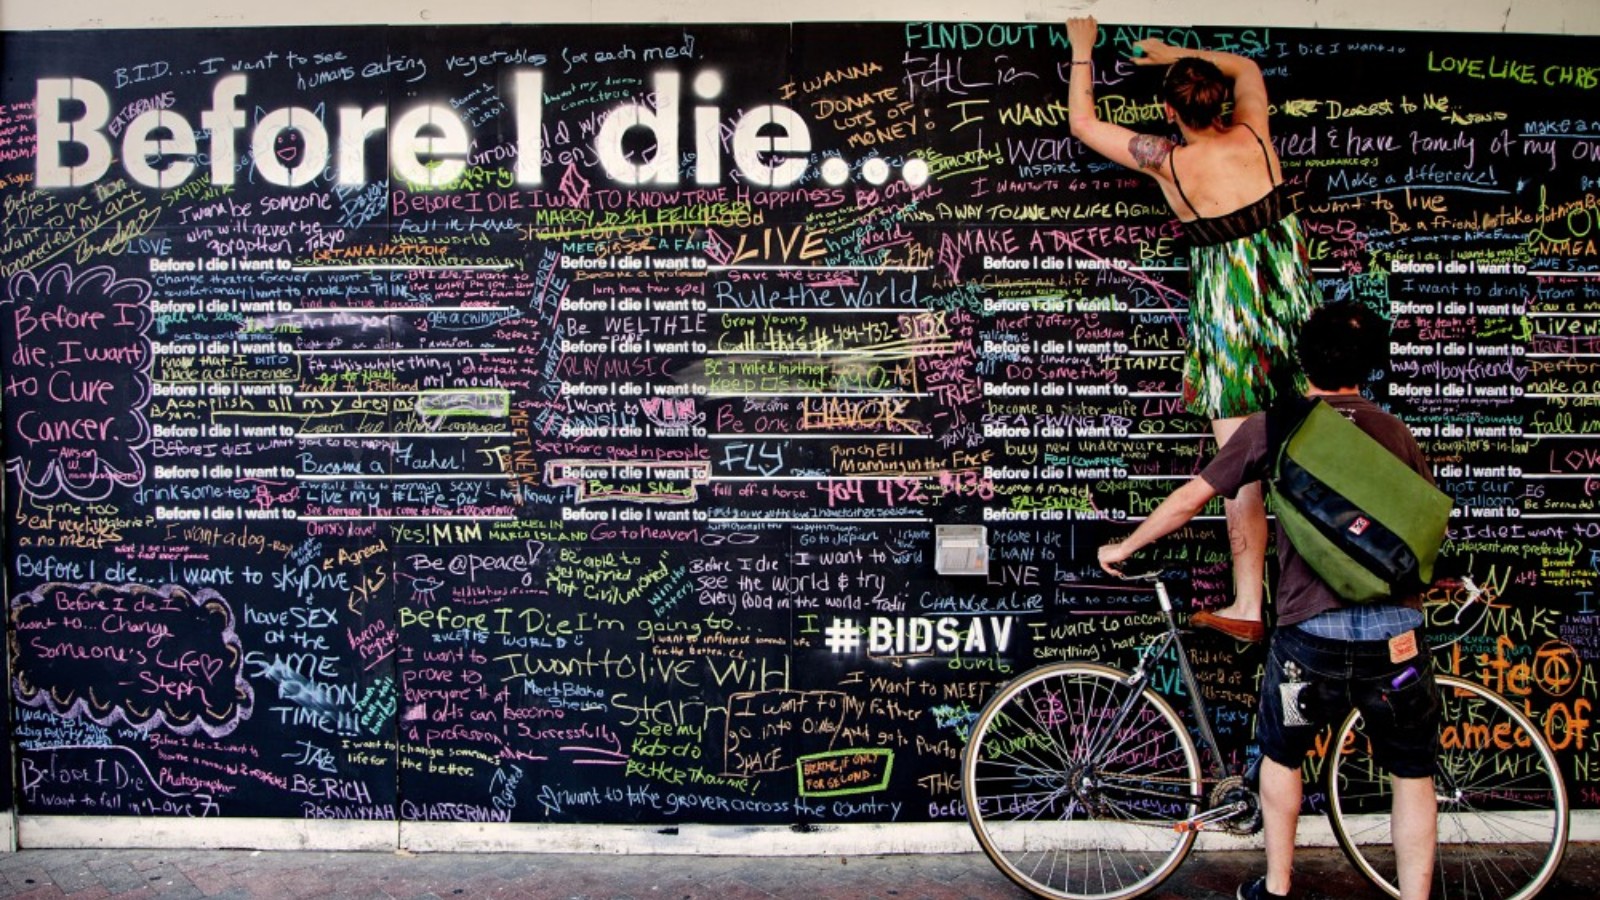 A blackboard reads 'Before I die...' in large white letters on the top left hand corner. The blackboard is covered in writing in many different colours of chalk. On the right there is a person wearing shorts and a t-shirt holding a bike against the blackboard while another person wears a green dress stands on the bike reaching to the top of the blackboard to write something.